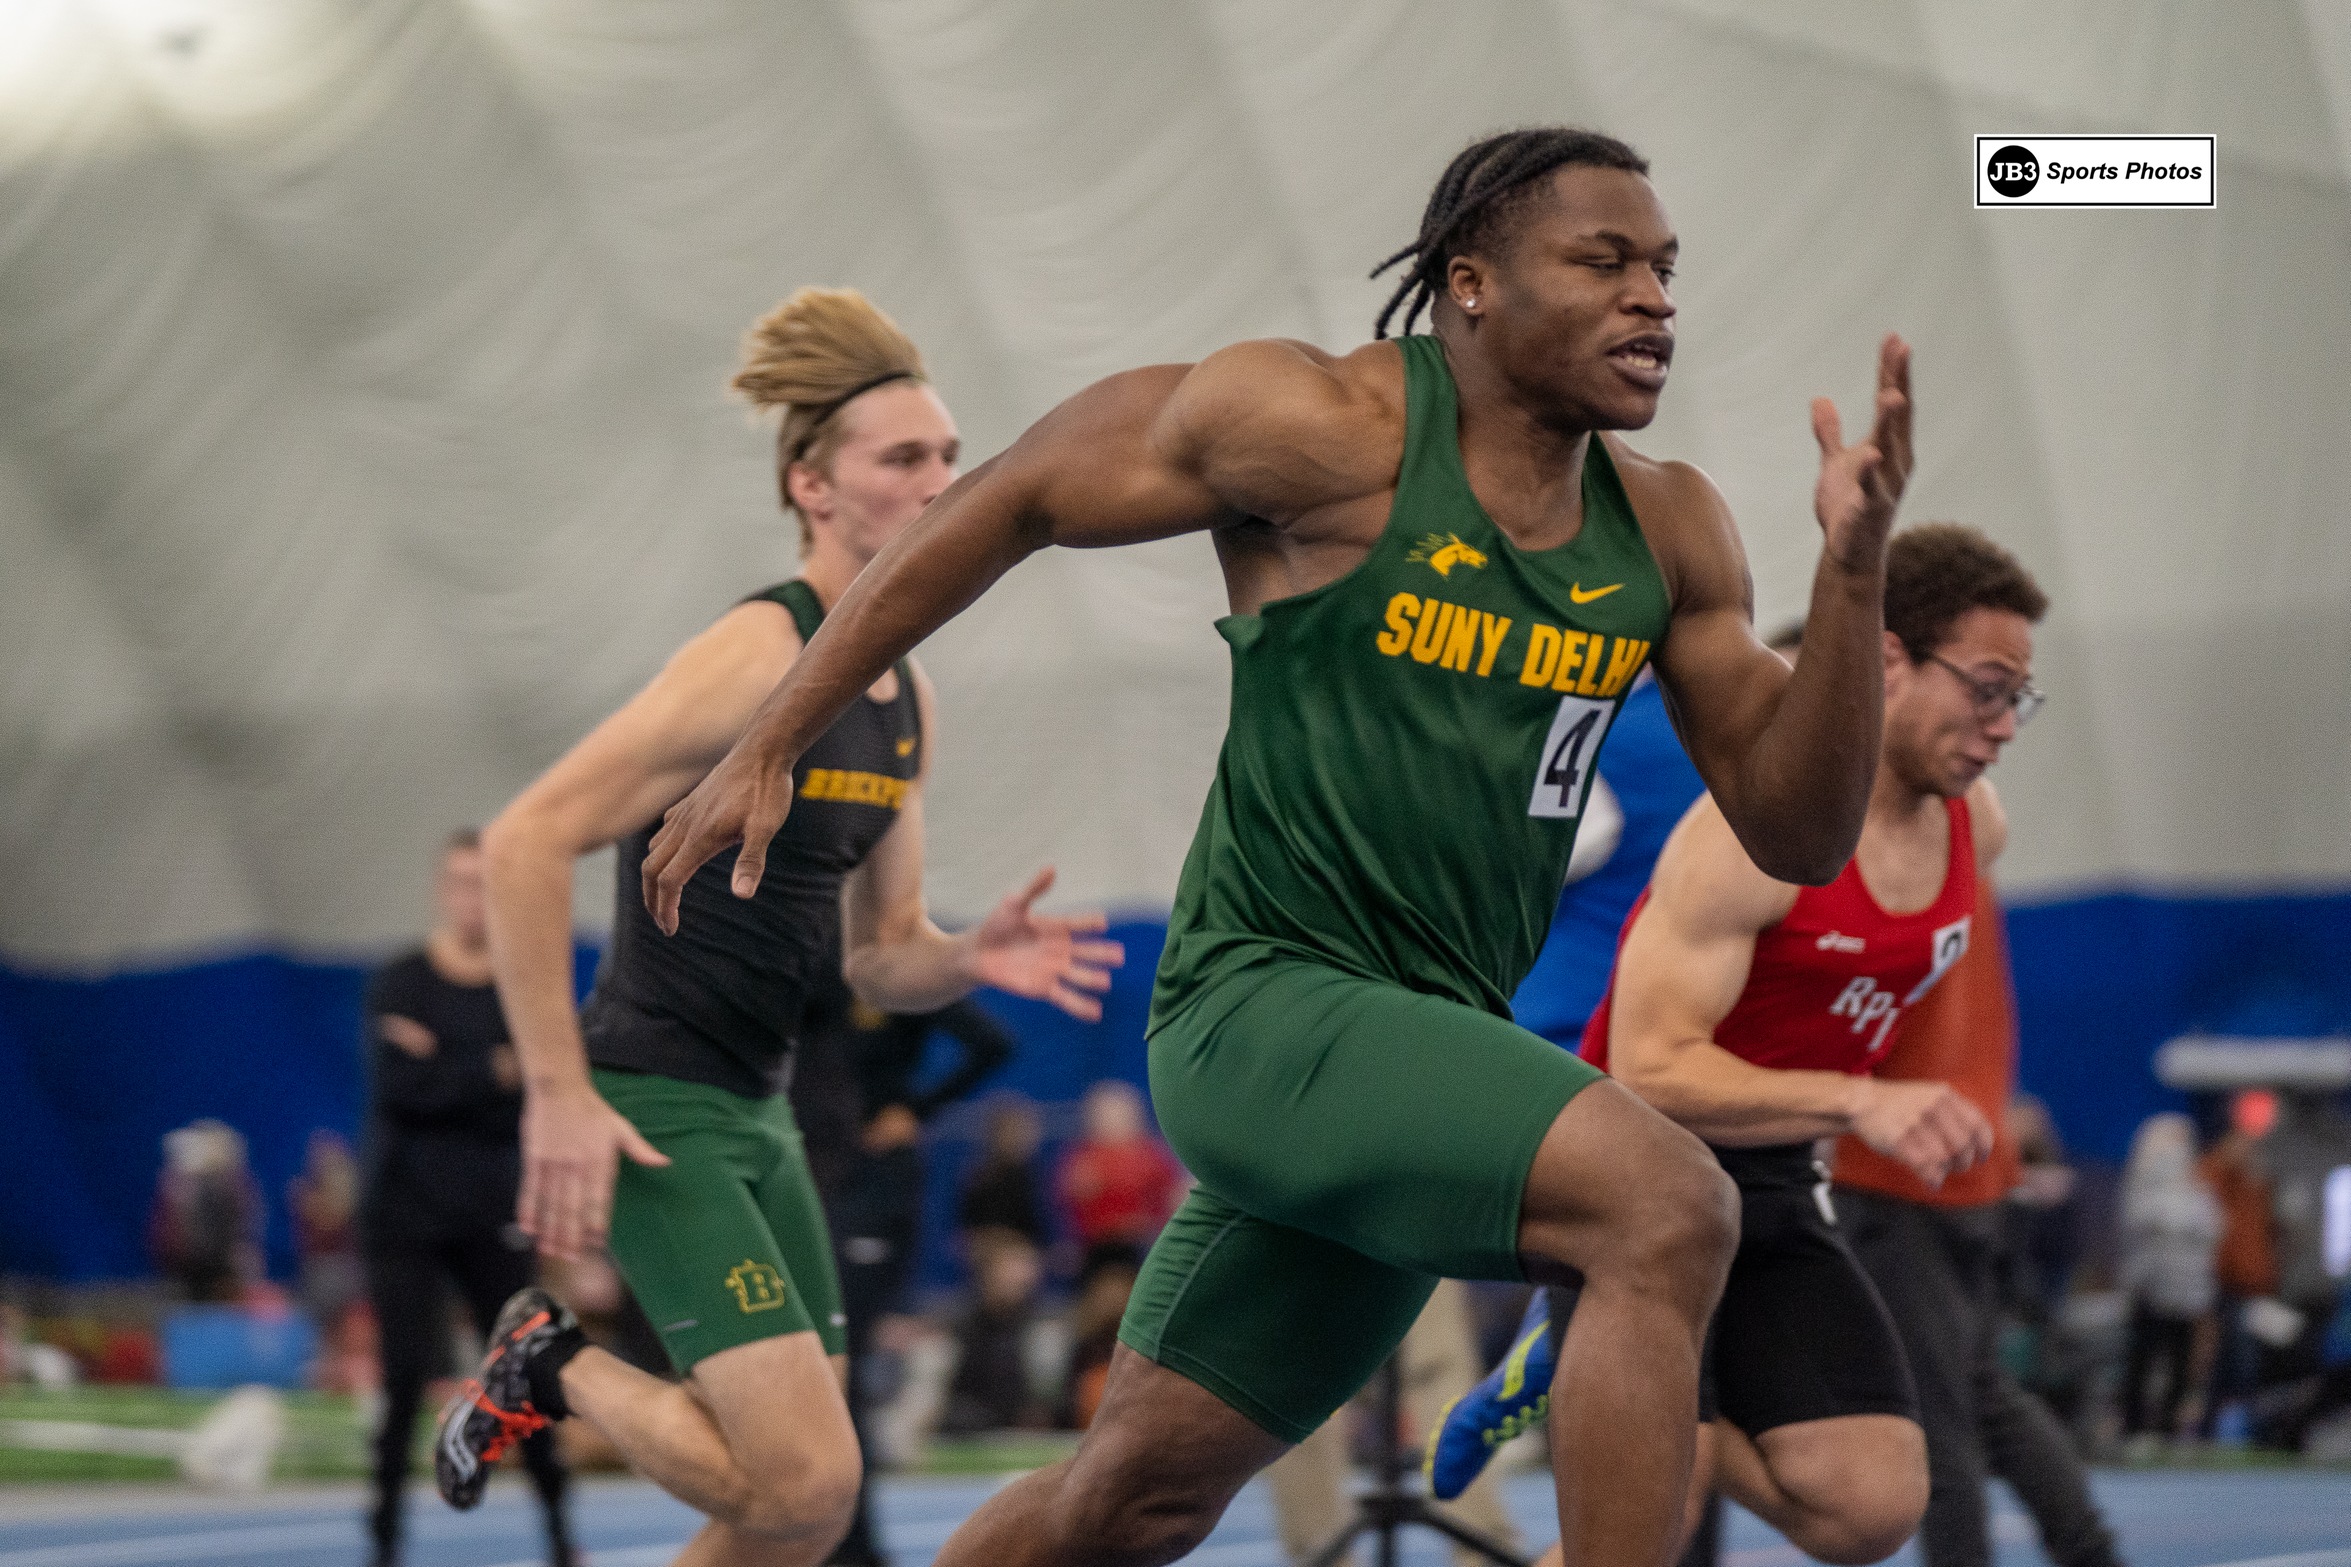 Harris Runs Fastest Time in the Country